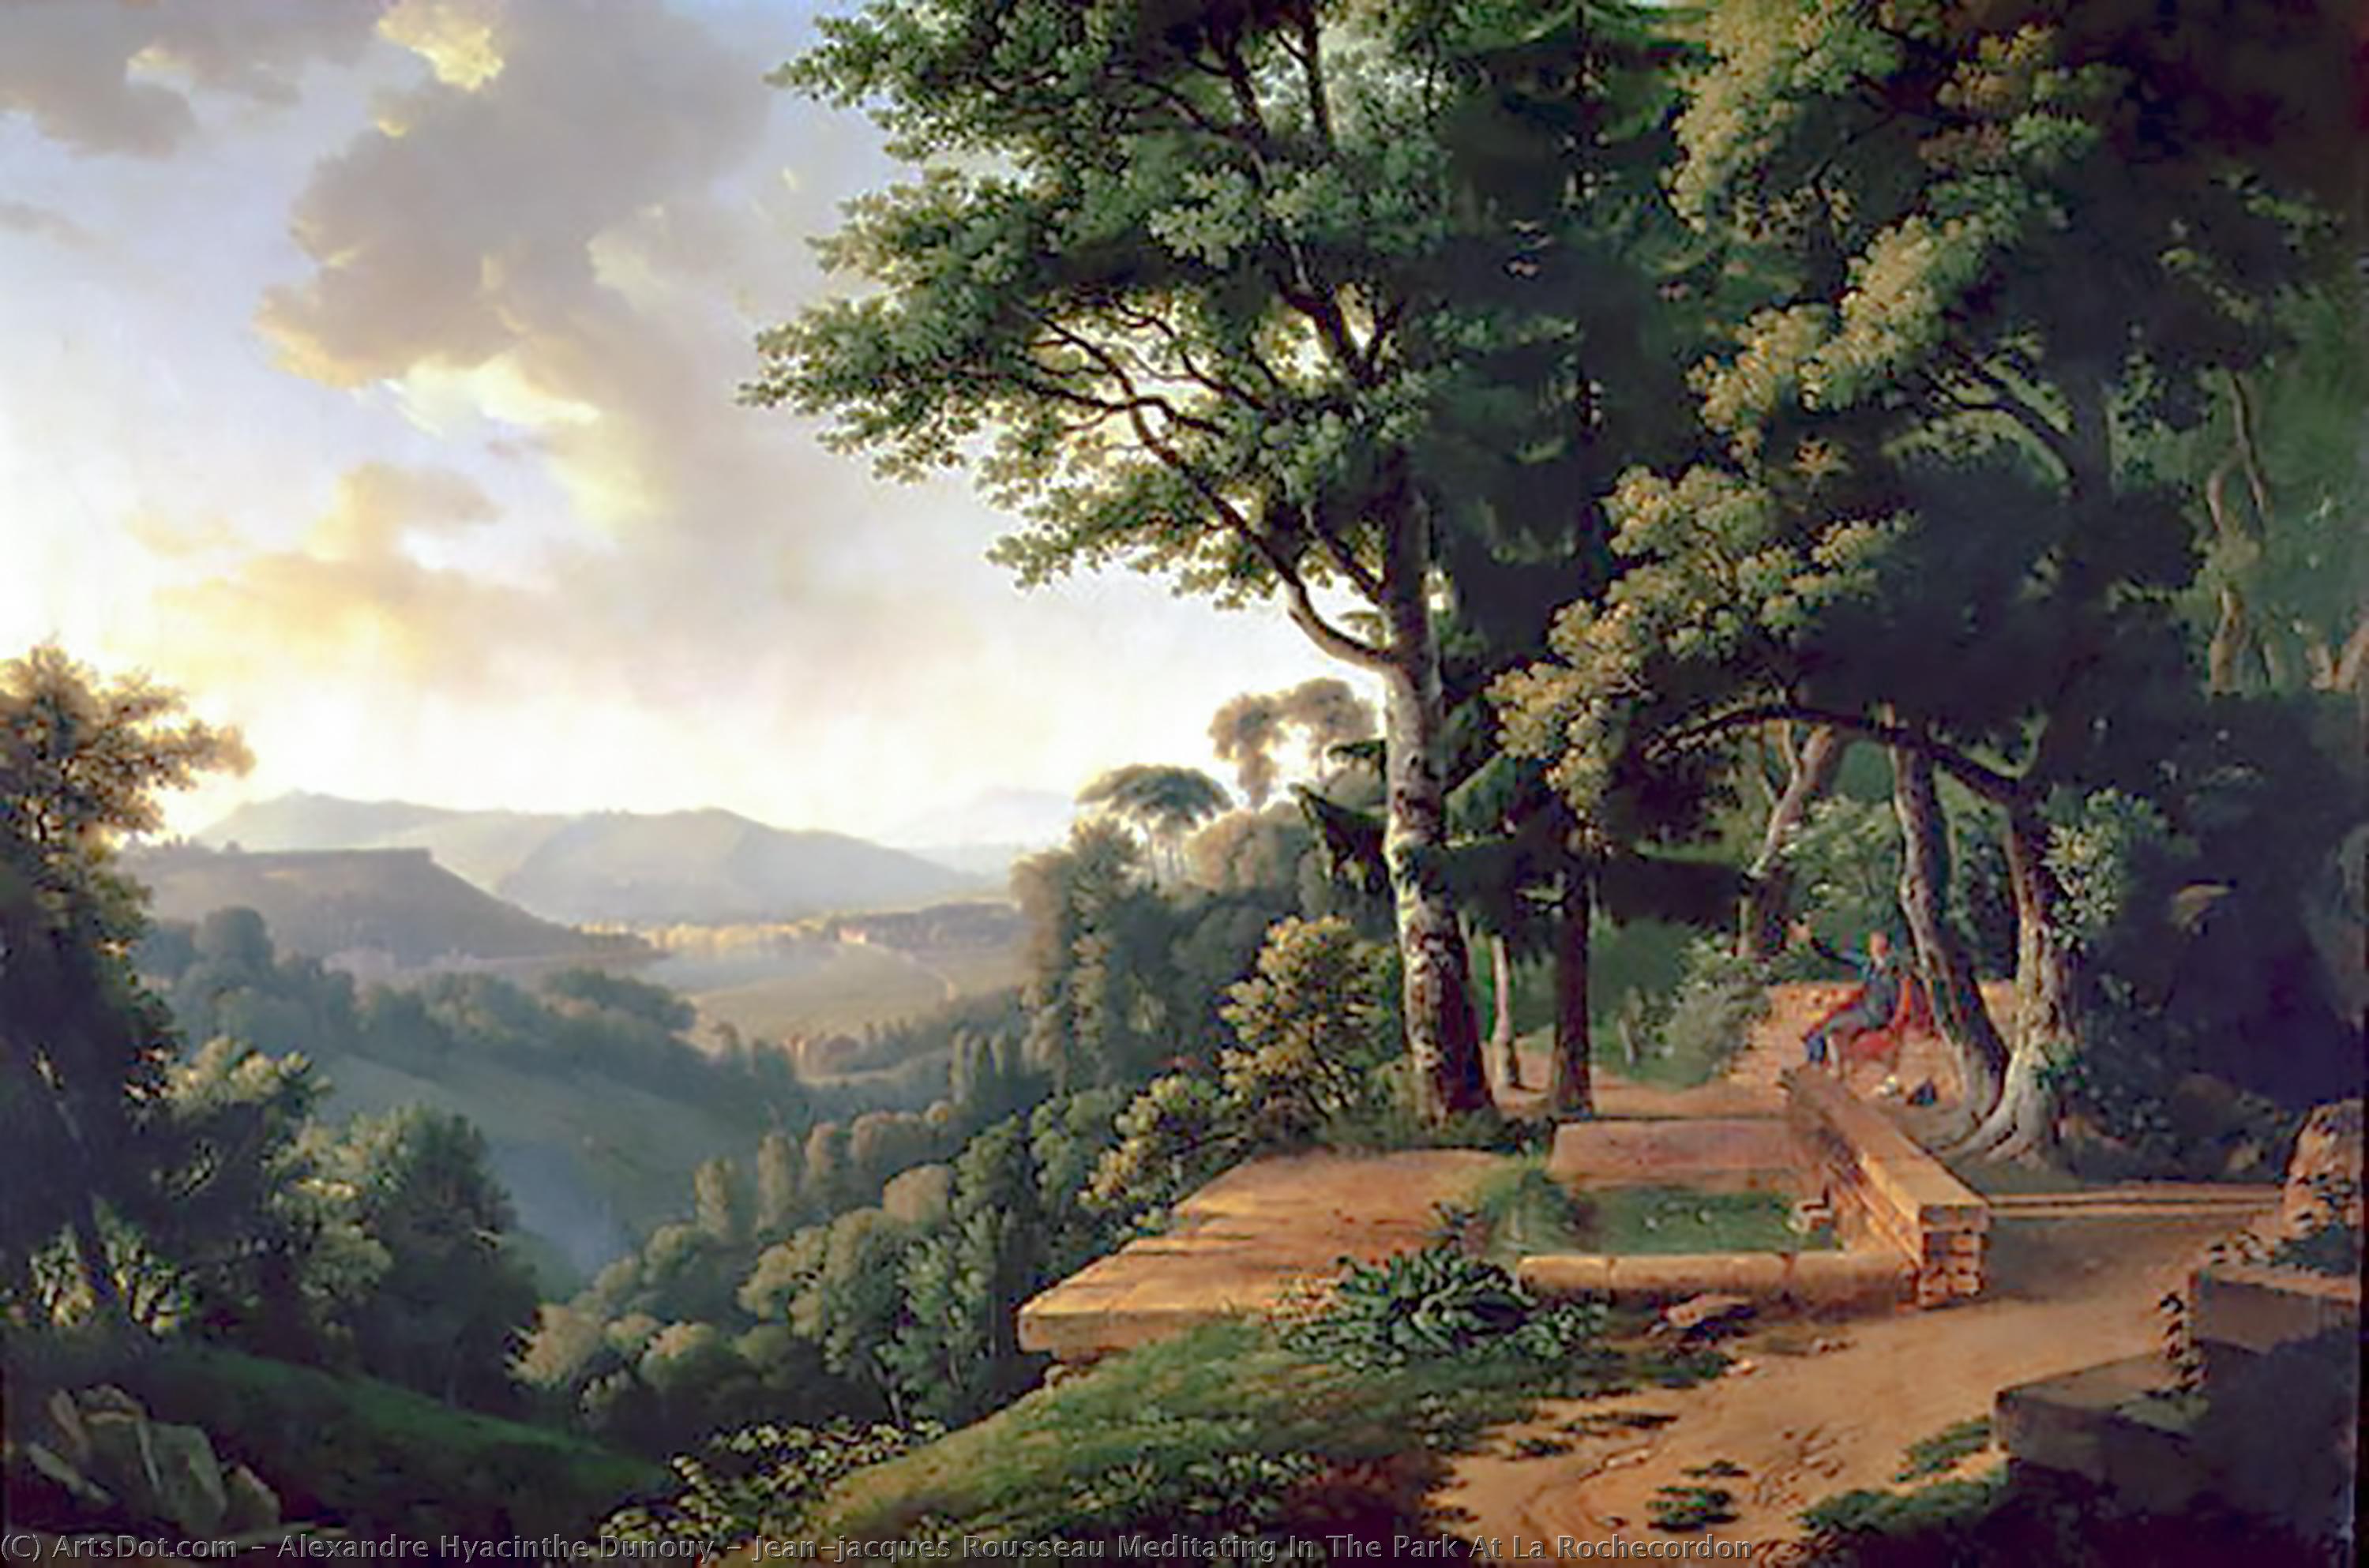 Order Paintings Reproductions Jean-jacques Rousseau Meditating In The Park At La Rochecordon by Alexandre Hyacinthe Dunouy (1757-1841, France) | ArtsDot.com